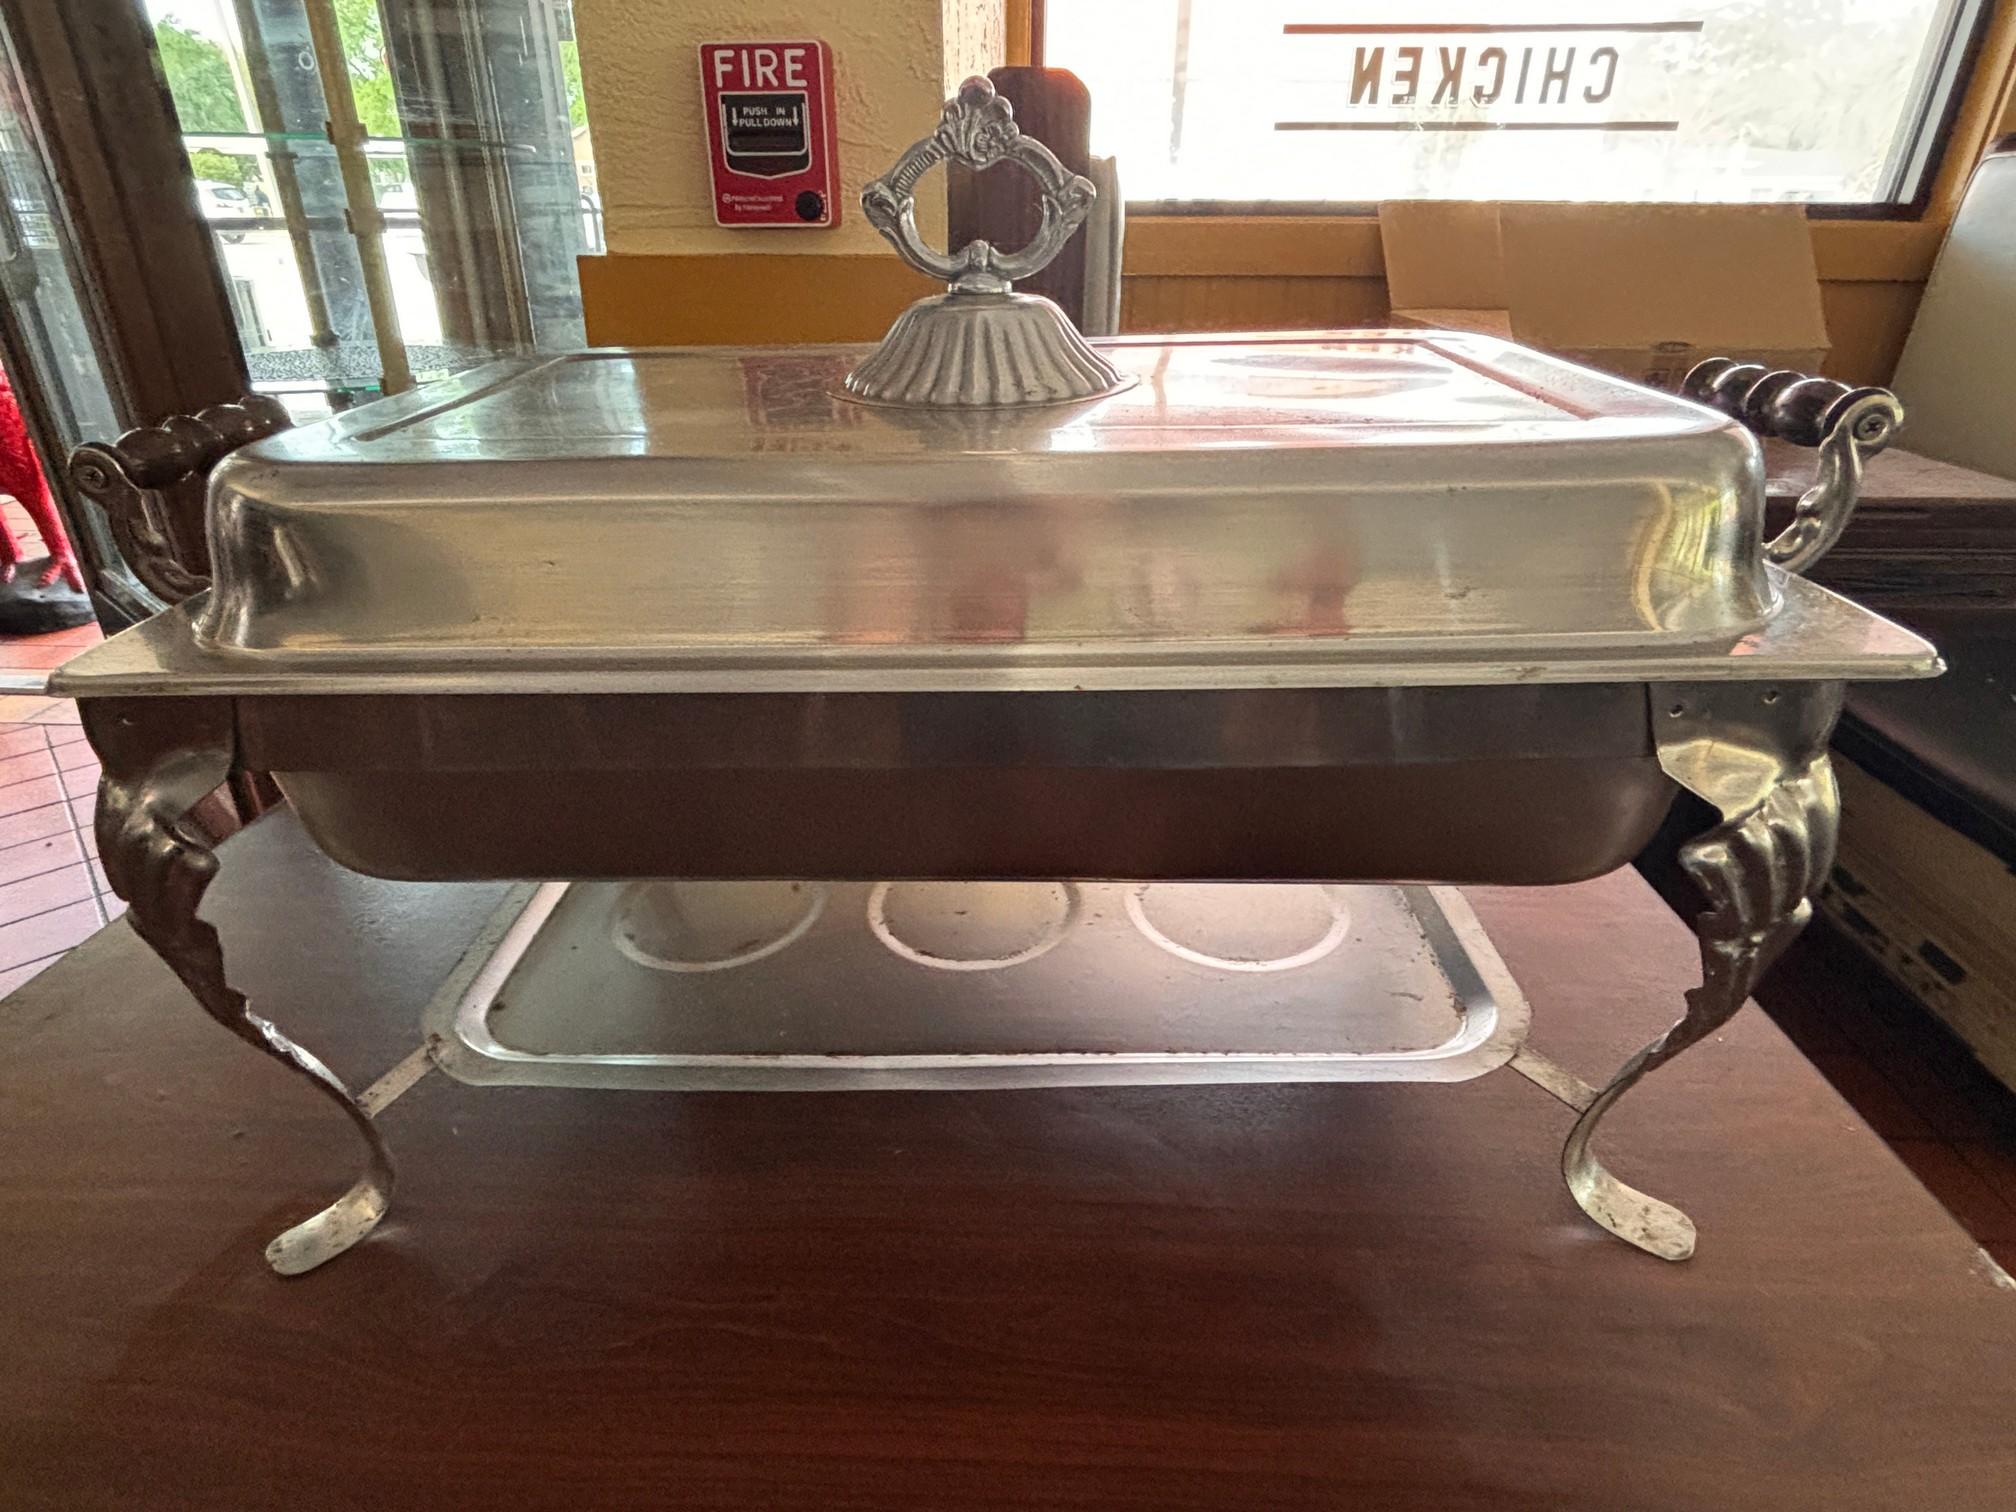 (4) Antique Style Full Size Pan Chafing Dish